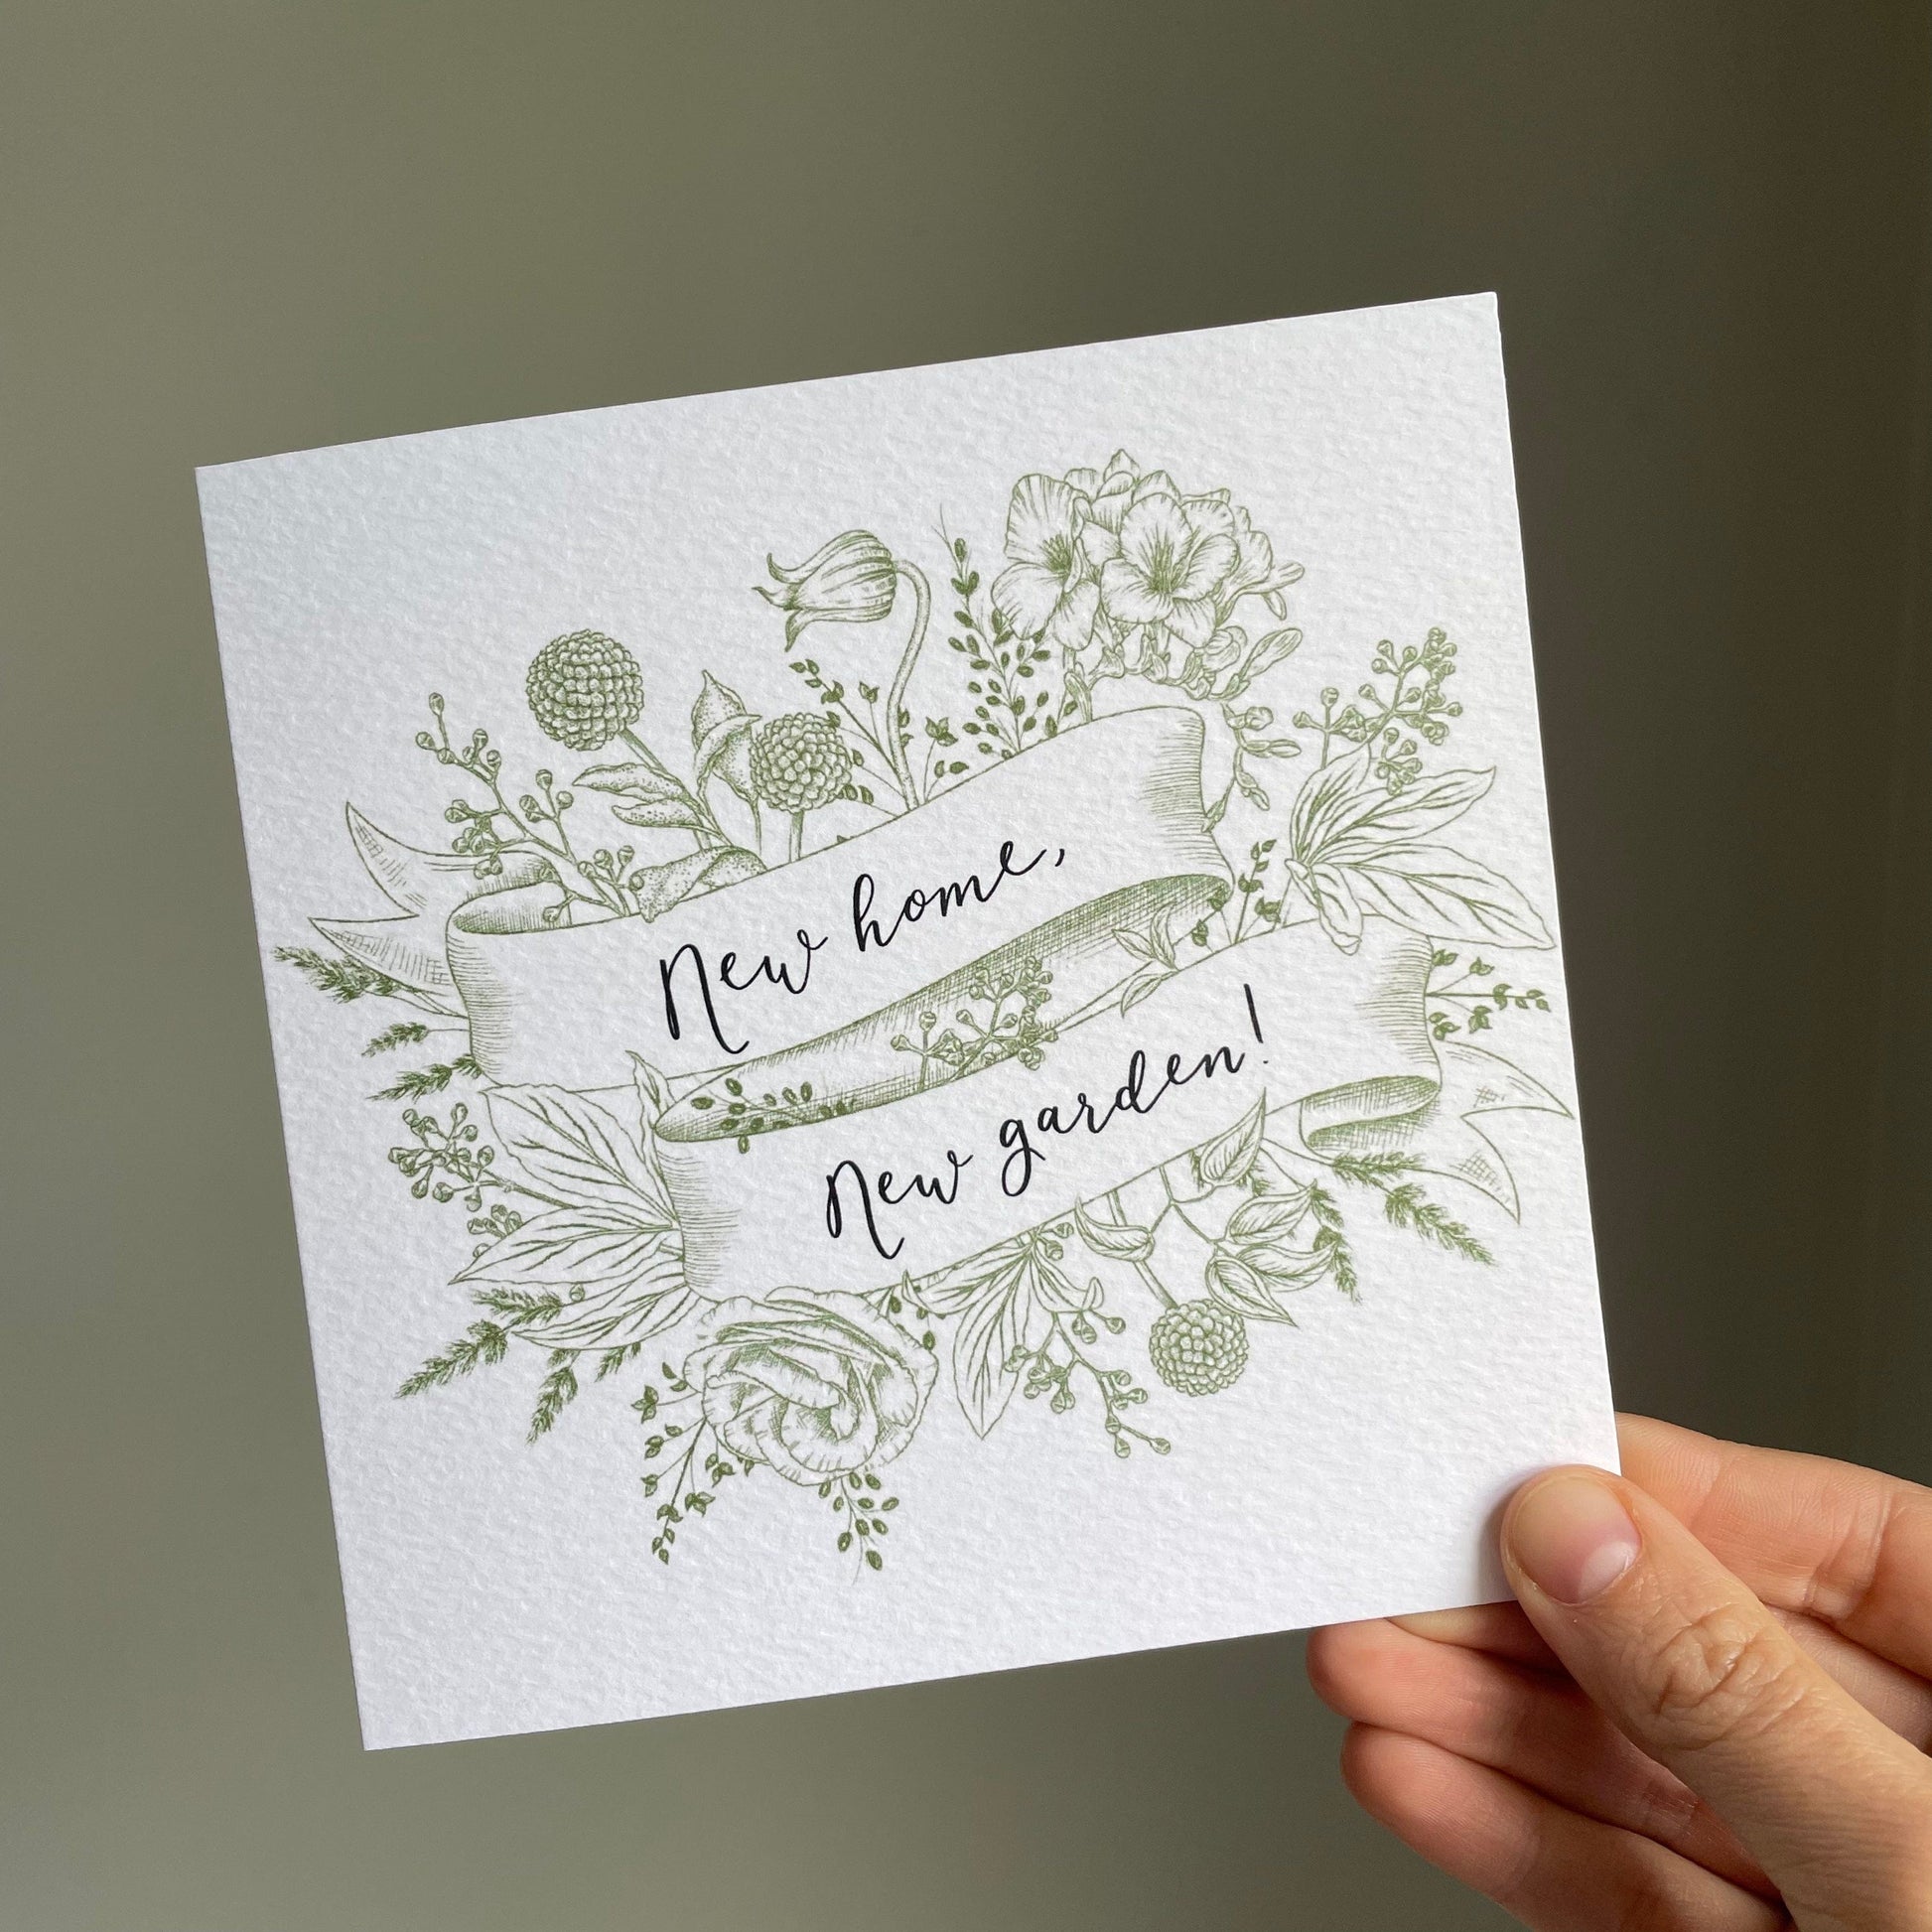 New home, new garden card Greeting & Note Cards And Hope Designs   